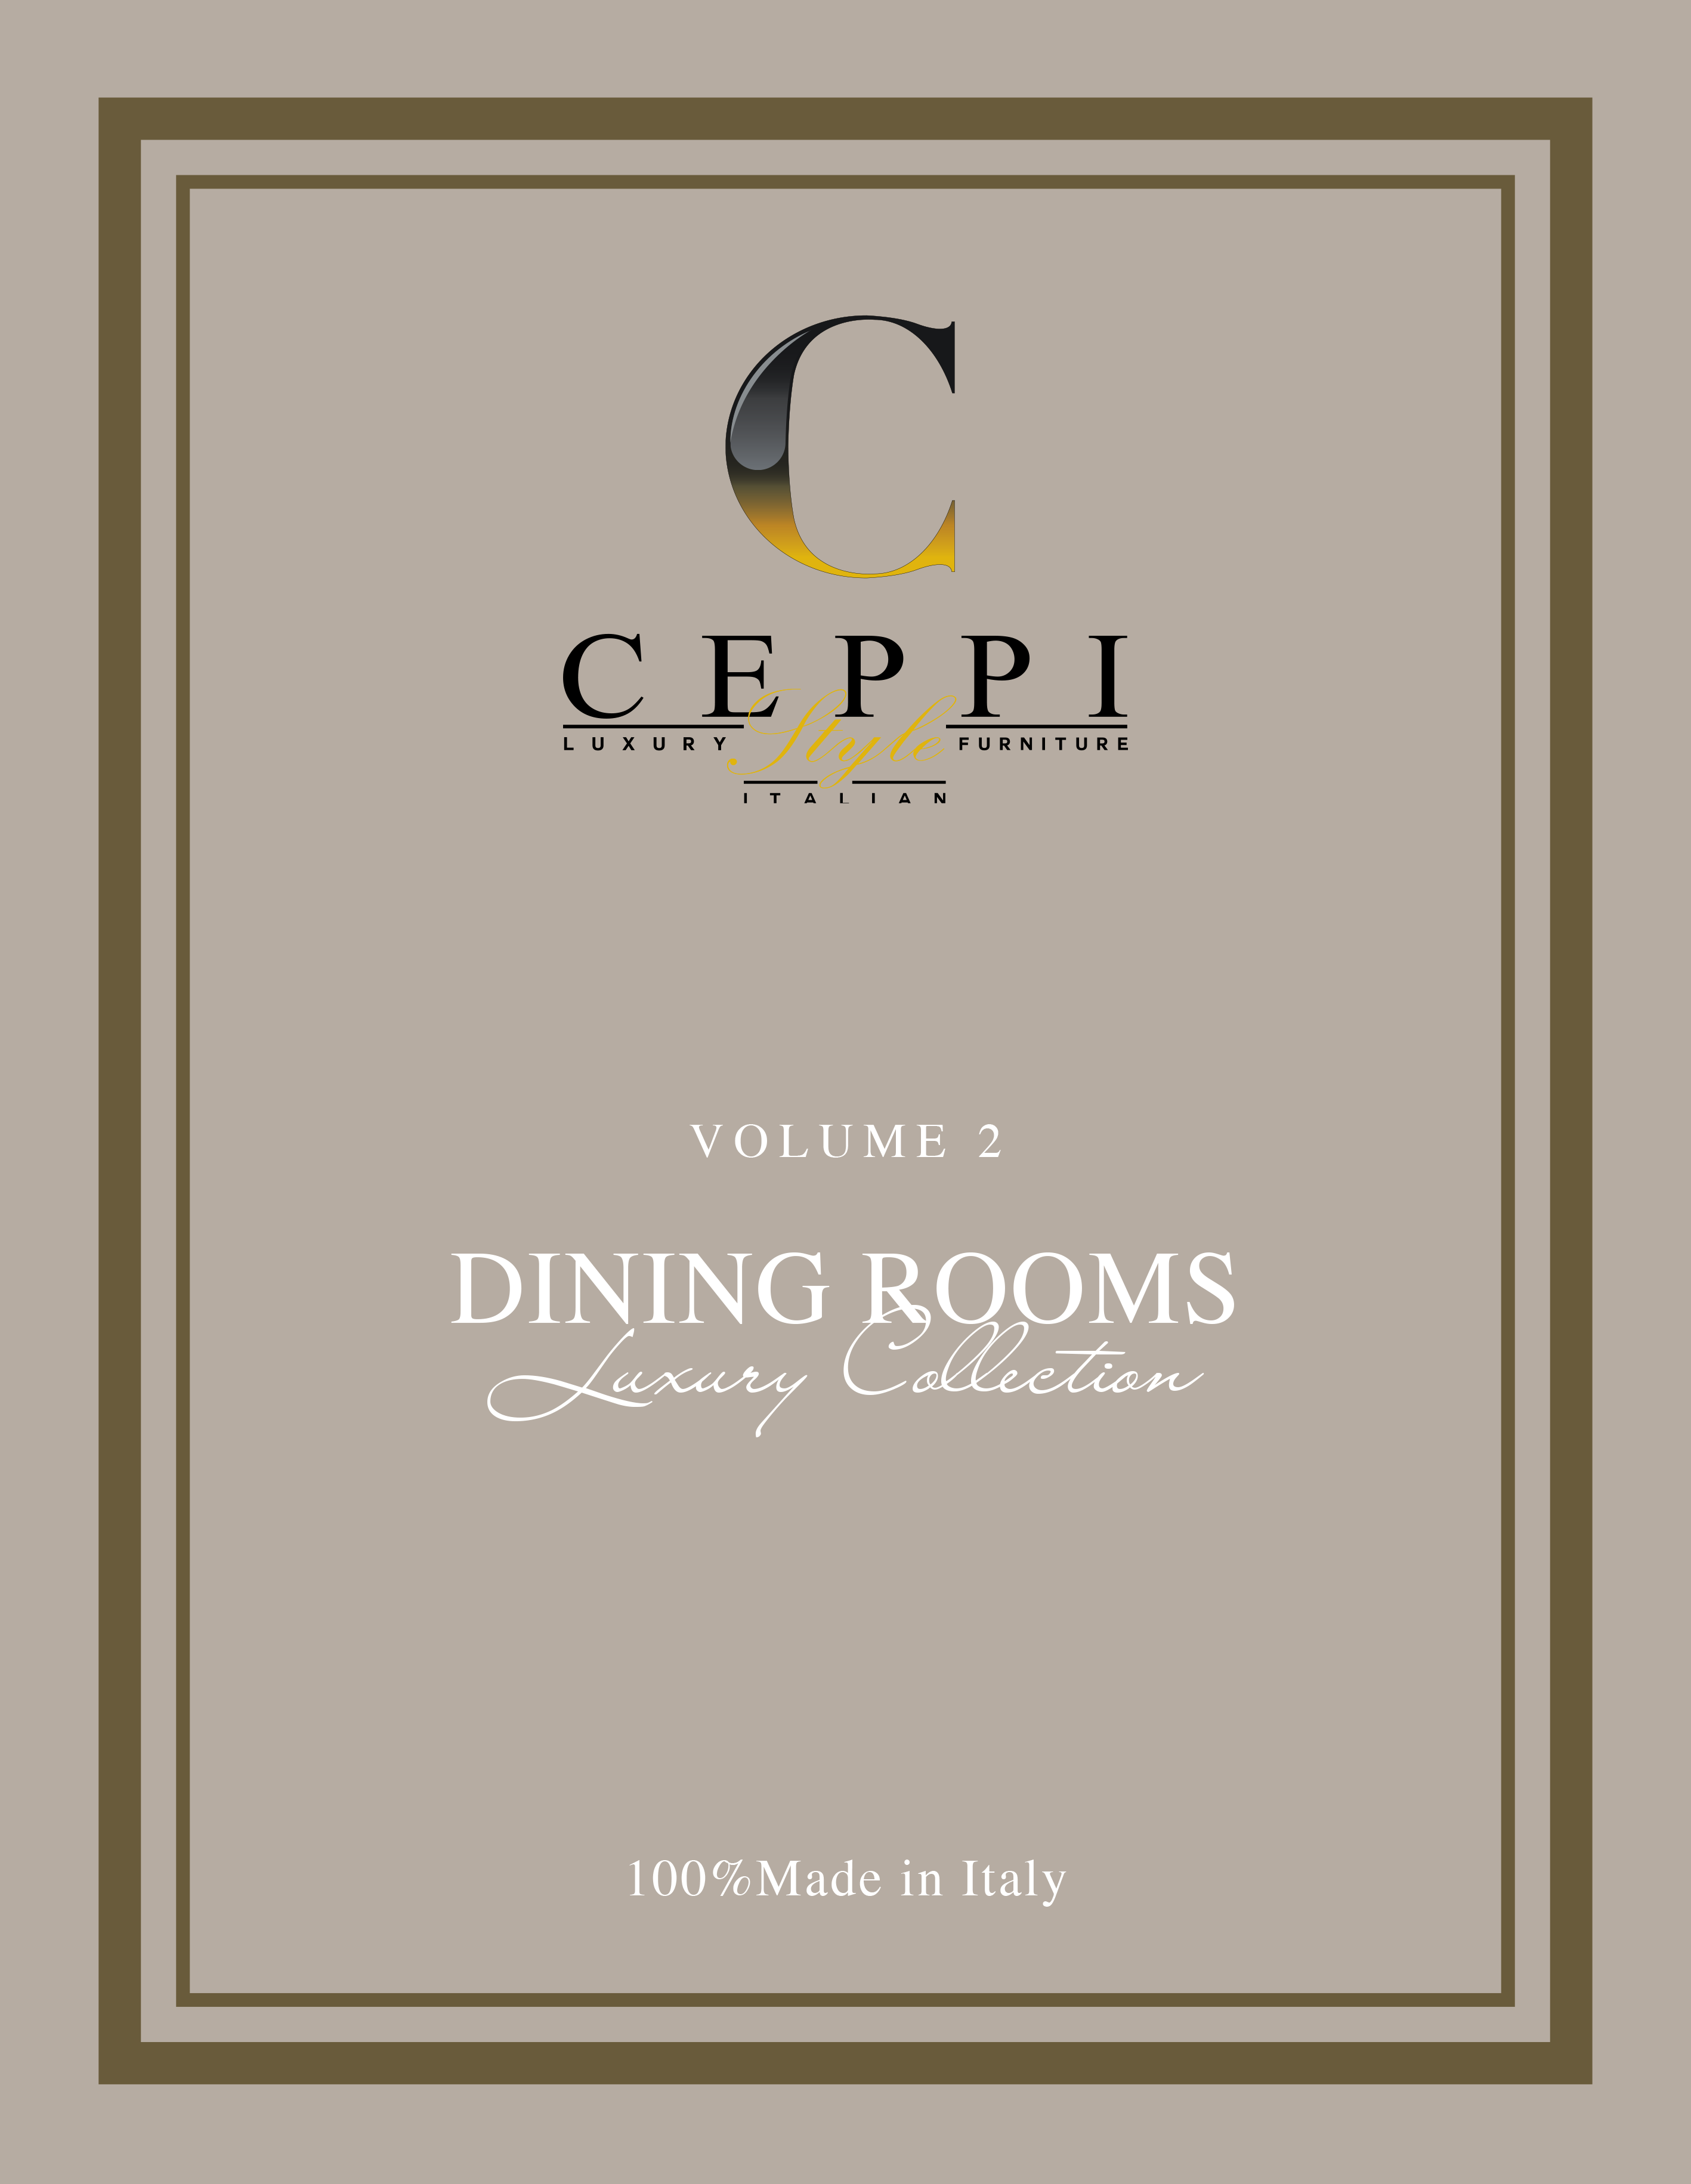 VOLUME 2 - DINING ROOMS